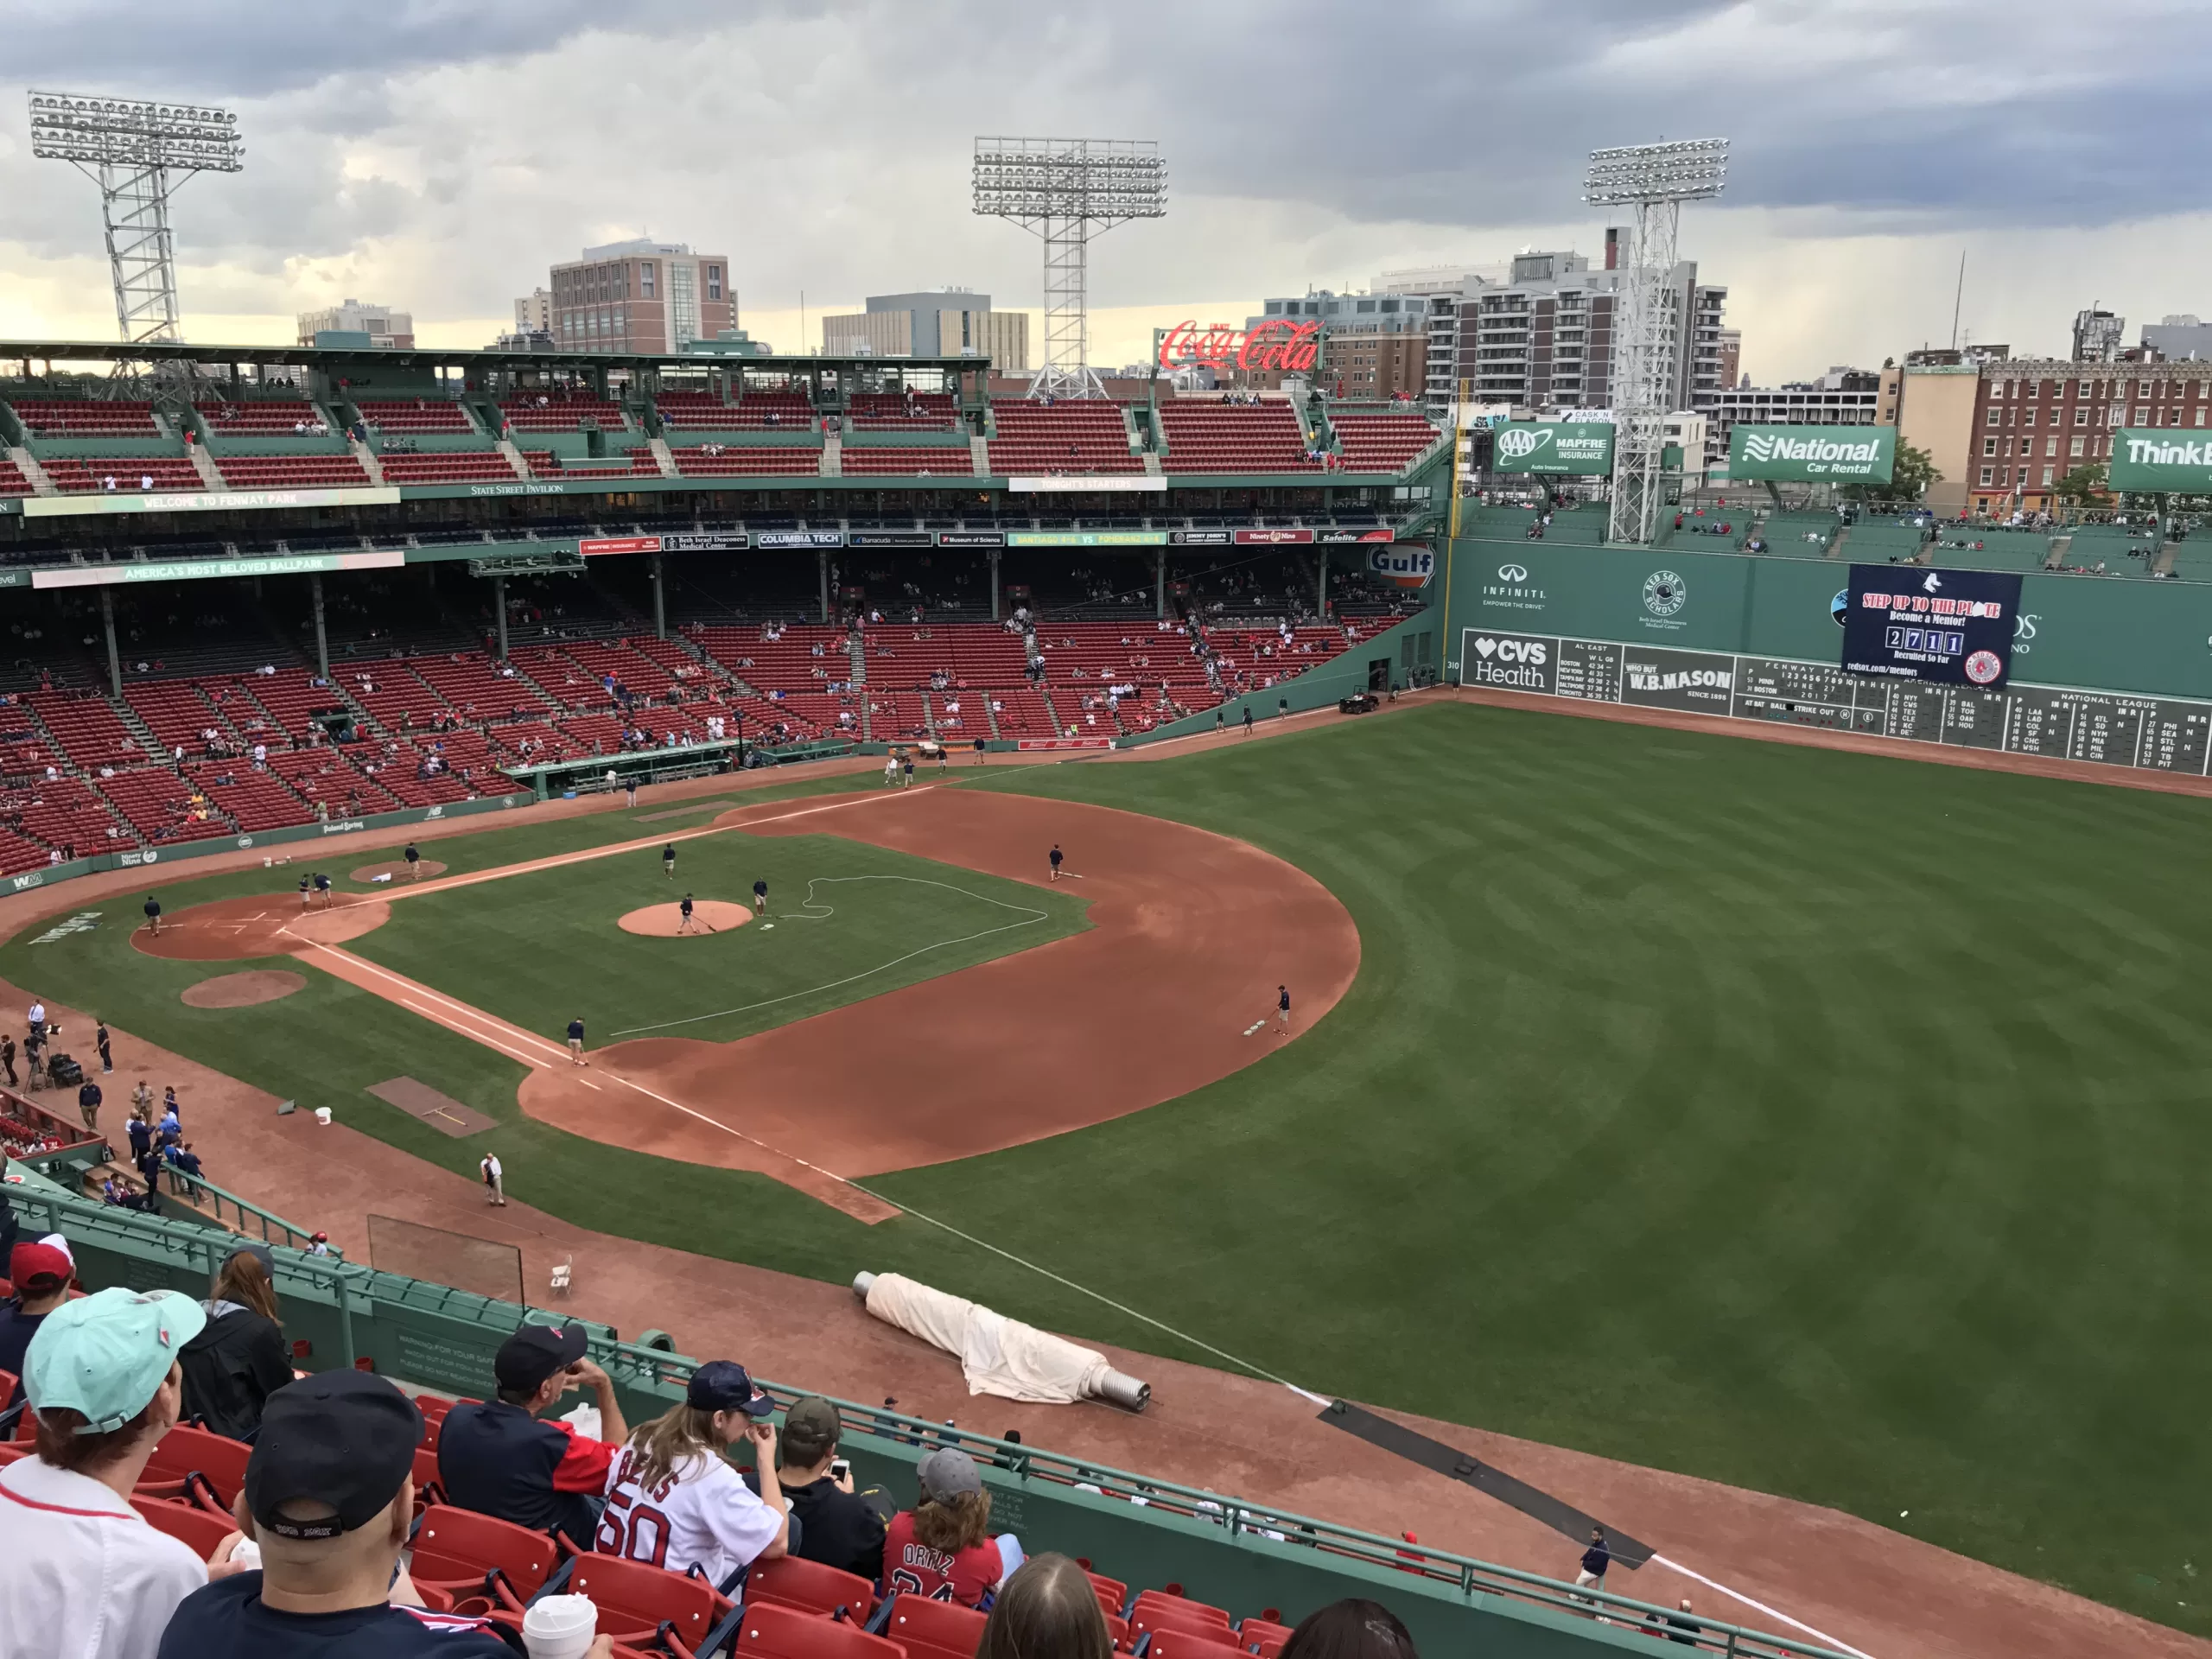 A pre-game view of Fenway Park from the upper level down the right field foul line. The grounds crew is preparing the field, and the Green Monster is in view.